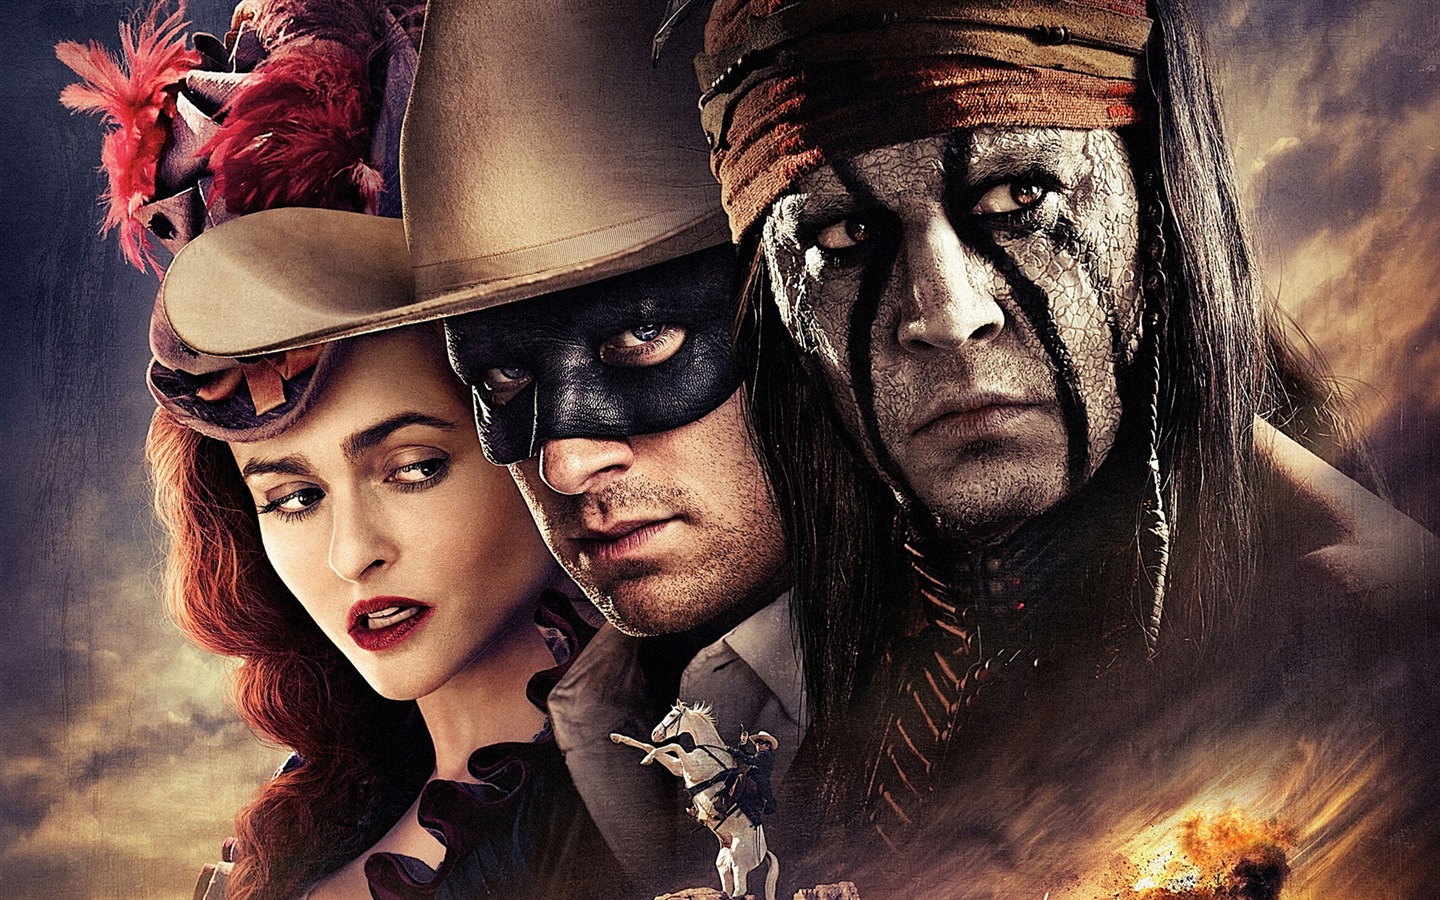 The Lone Ranger HD movie wallpapers #1 - 1440x900